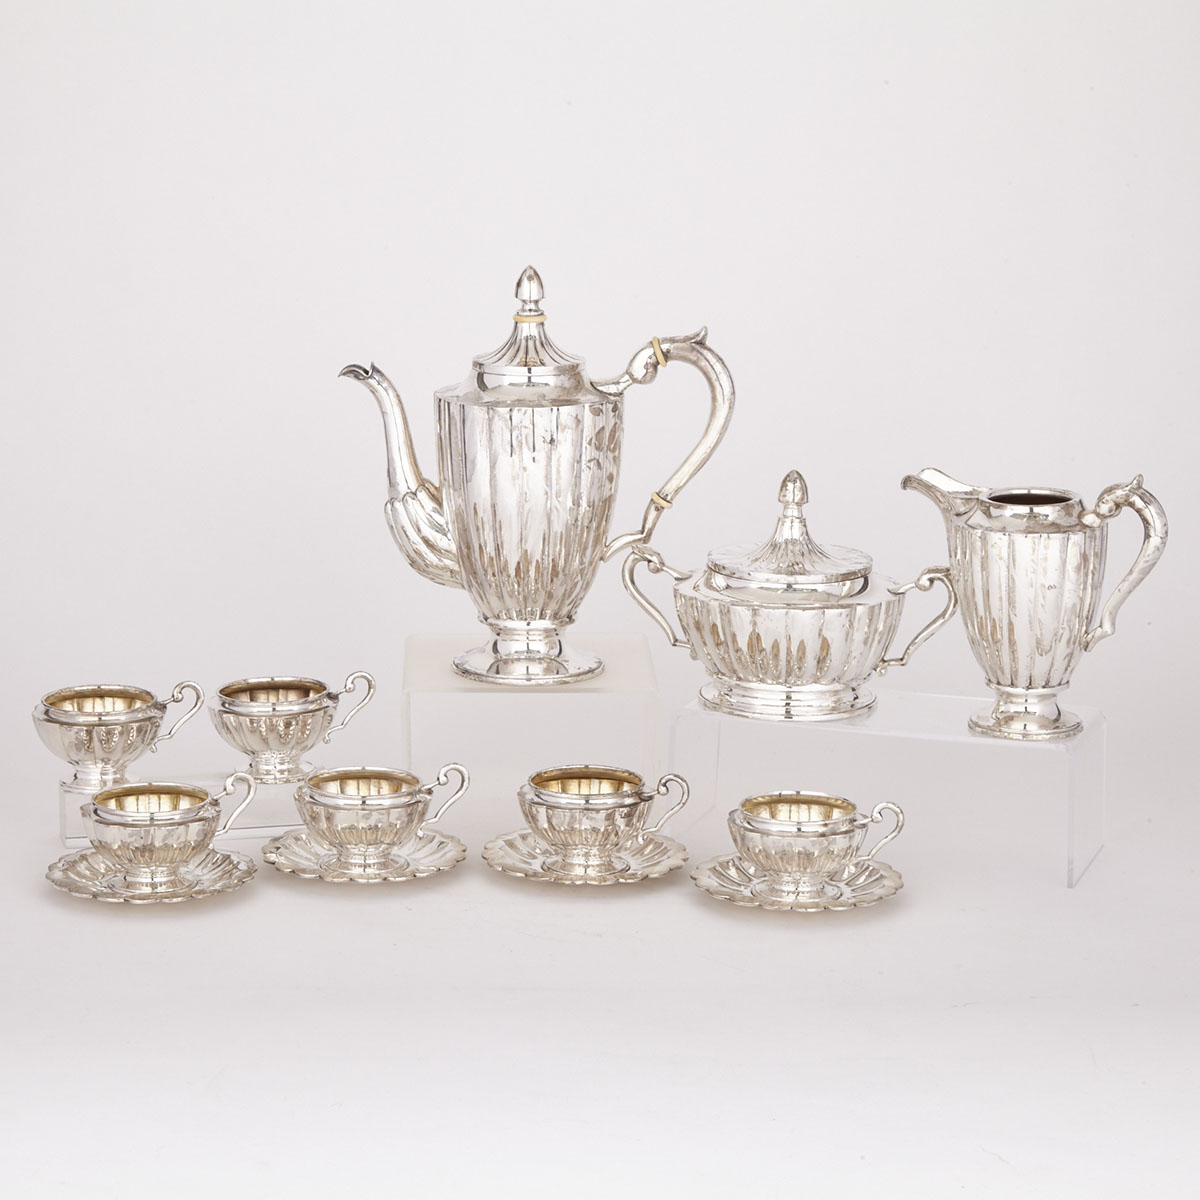 Hungarian Silver Coffee Service, 20th century